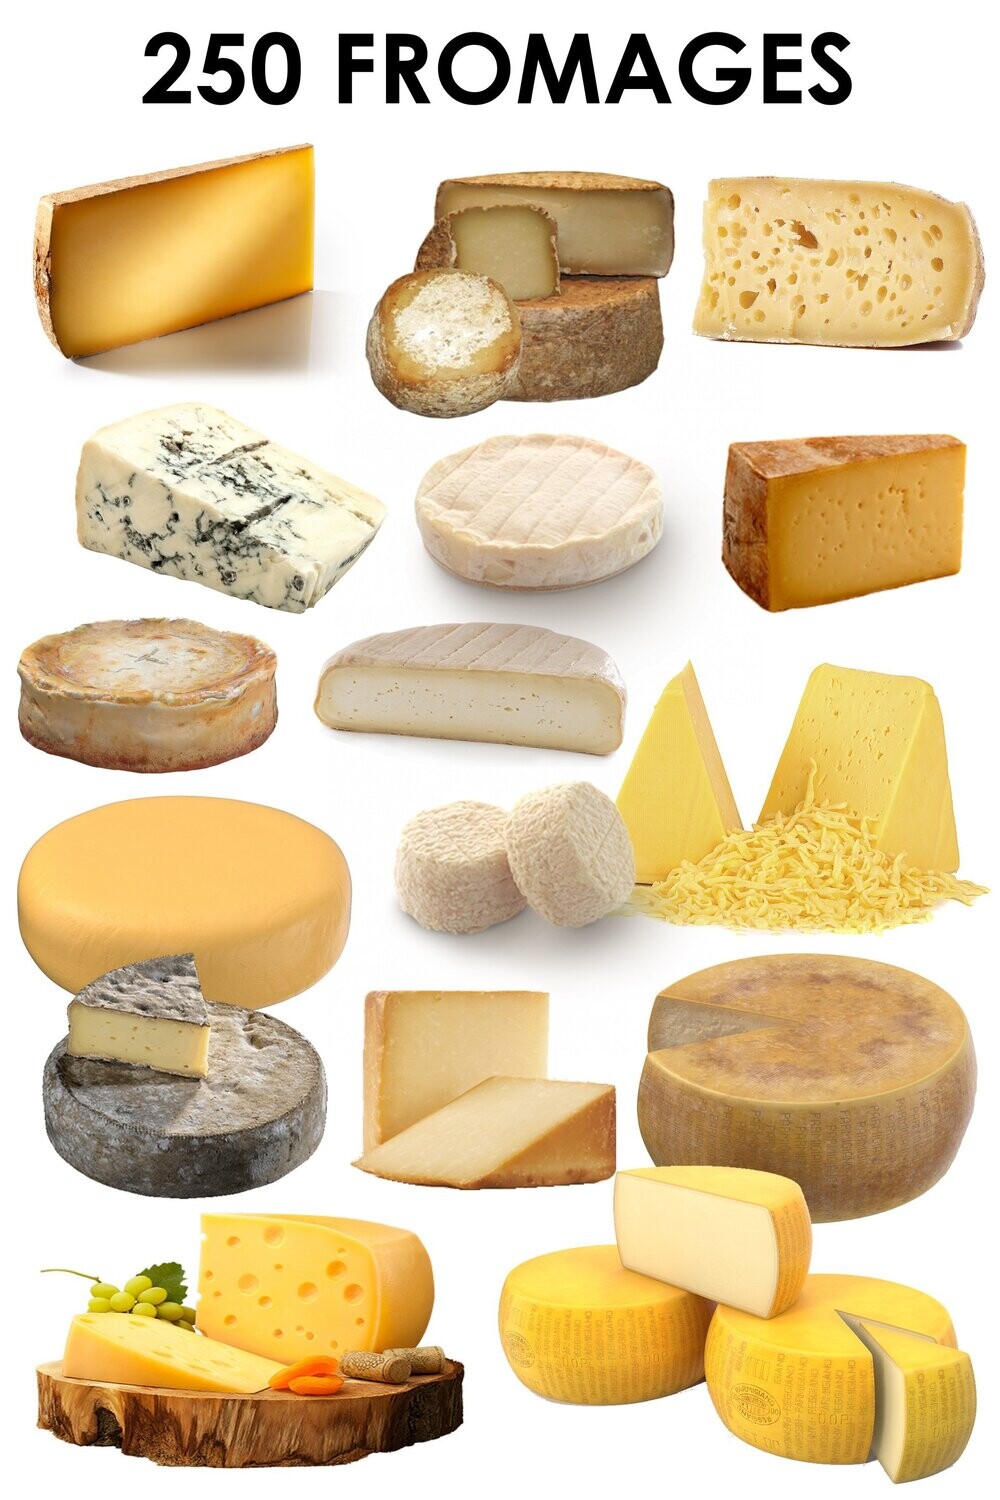 E. PACK FROMAGES 250 PNG